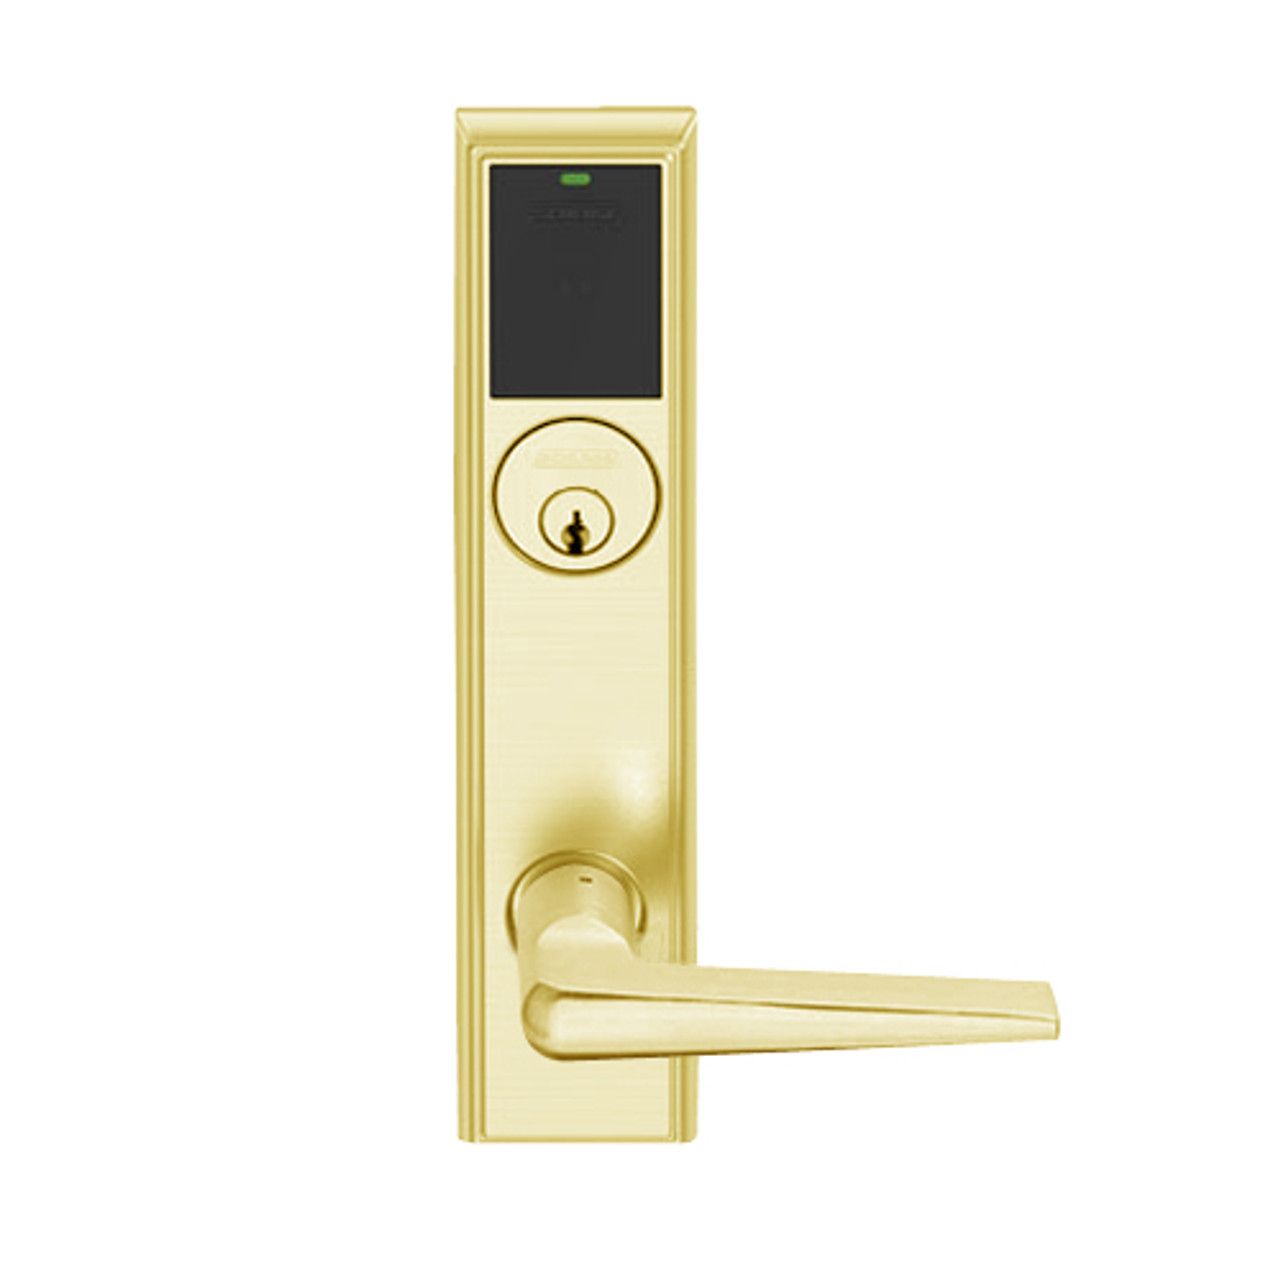 LEMB-ADD-P-05-605 Schlage Privacy/Office Wireless Addison Mortise Lock with Push Button, LED and 05 Lever in Bright Brass